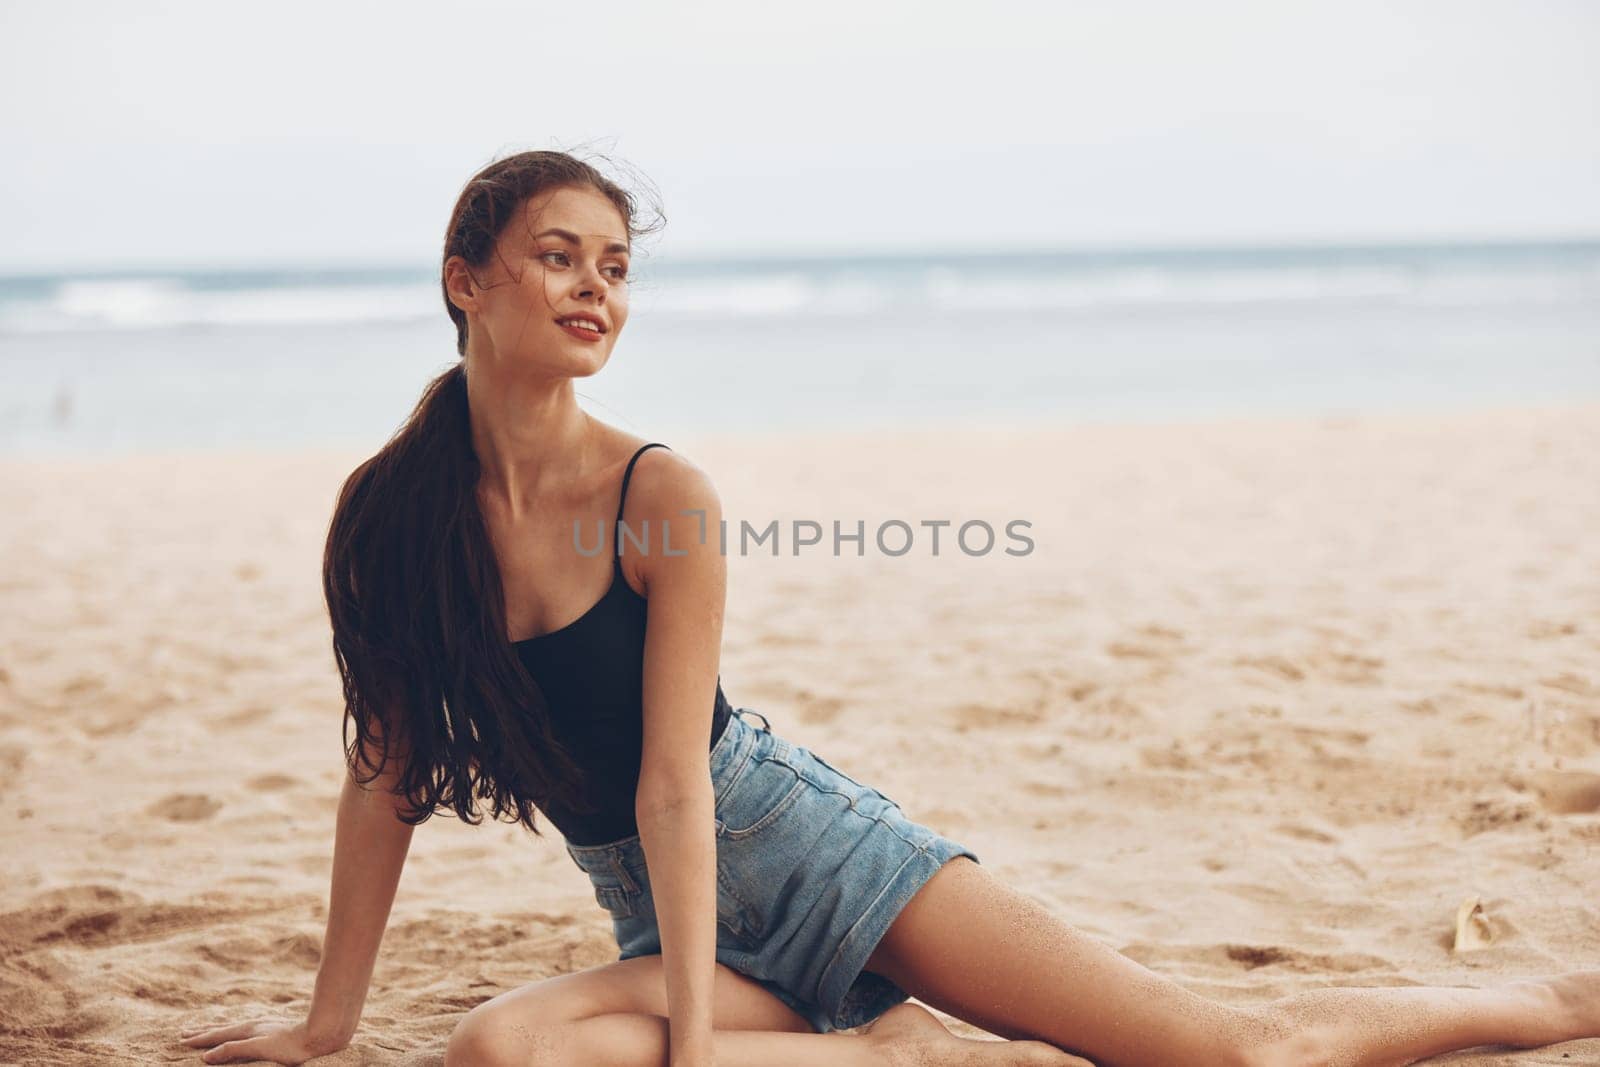 hair woman bali pretty nature sea sitting sexy long smile beauty back beach view ocean travel body adult freedom carefree vacation water sand